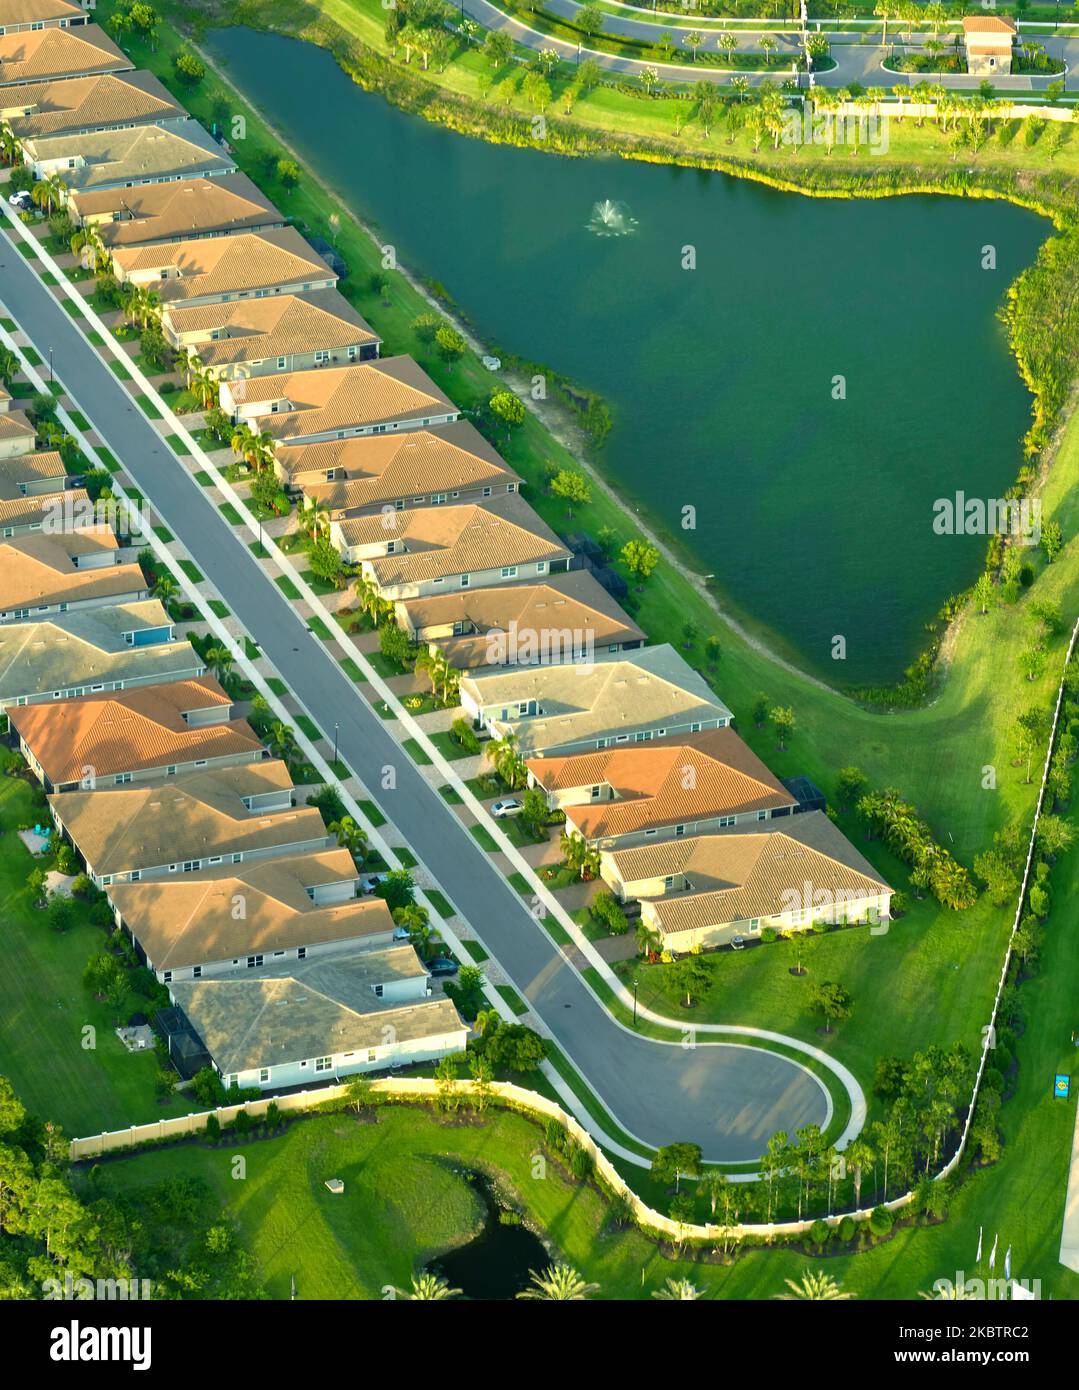 Aerial view of cul de sac at neighbourhood road dead end with densely built homes in Florida closed living area. Real estate development of family hou Stock Photo